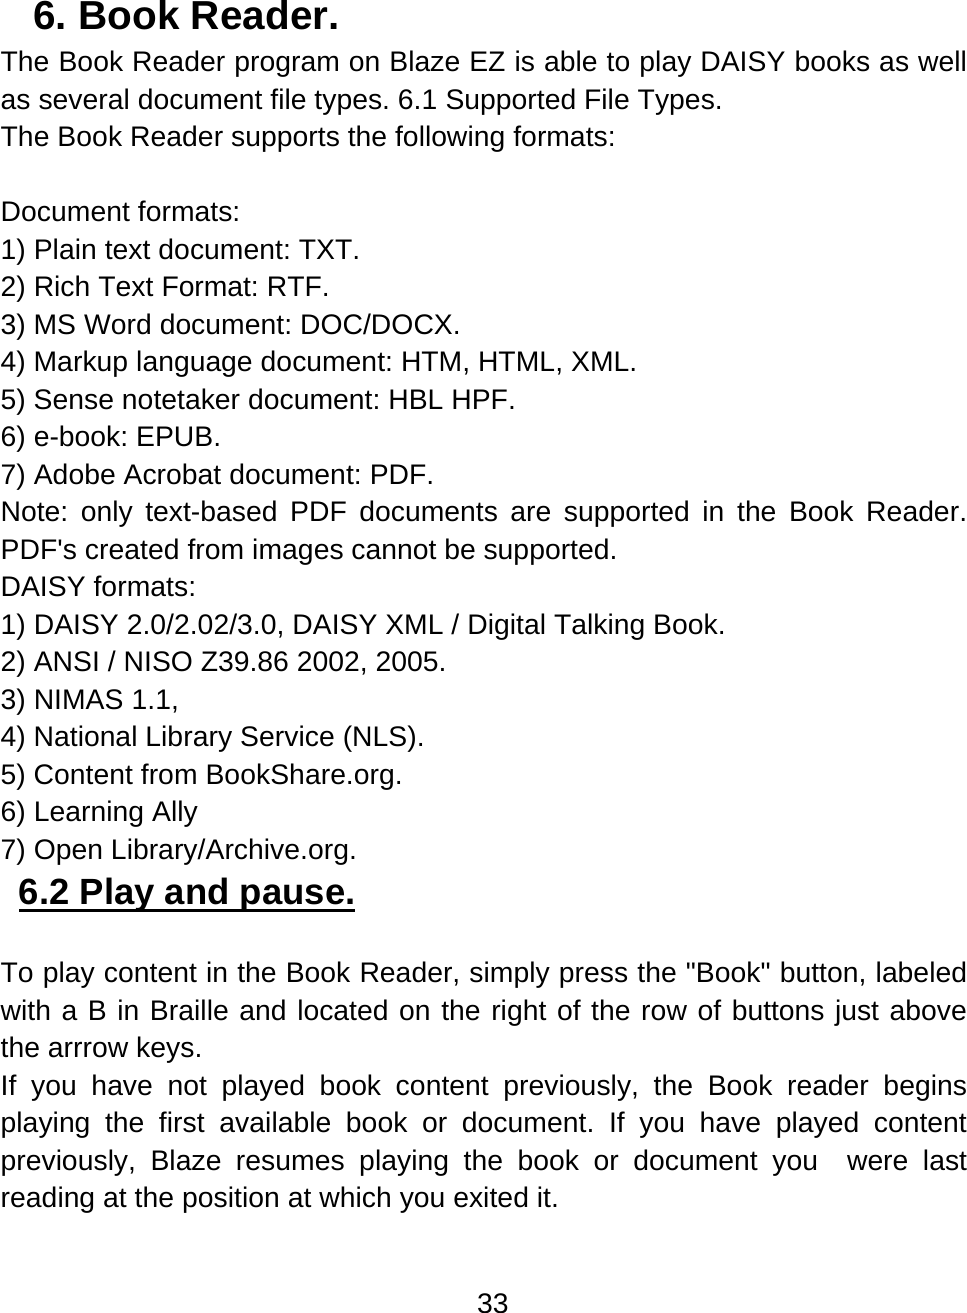 33  6. Book Reader.  The Book Reader program on Blaze EZ is able to play DAISY books as well as several document file types. 6.1 Supported File Types.   The Book Reader supports the following formats:  Document formats: 1) Plain text document: TXT. 2) Rich Text Format: RTF. 3) MS Word document: DOC/DOCX. 4) Markup language document: HTM, HTML, XML. 5) Sense notetaker document: HBL HPF. 6) e-book: EPUB. 7) Adobe Acrobat document: PDF. Note: only text-based PDF documents are supported in the Book Reader. PDF&apos;s created from images cannot be supported. DAISY formats: 1) DAISY 2.0/2.02/3.0, DAISY XML / Digital Talking Book.  2) ANSI / NISO Z39.86 2002, 2005.  3) NIMAS 1.1,  4) National Library Service (NLS). 5) Content from BookShare.org.  6) Learning Ally 7) Open Library/Archive.org. 6.2 Play and pause.   To play content in the Book Reader, simply press the &quot;Book&quot; button, labeled with a B in Braille and located on the right of the row of buttons just above the arrrow keys.  If you have not played book content previously, the Book reader begins playing the first available book or document. If you have played content previously, Blaze resumes playing the book or document you  were last reading at the position at which you exited it. 